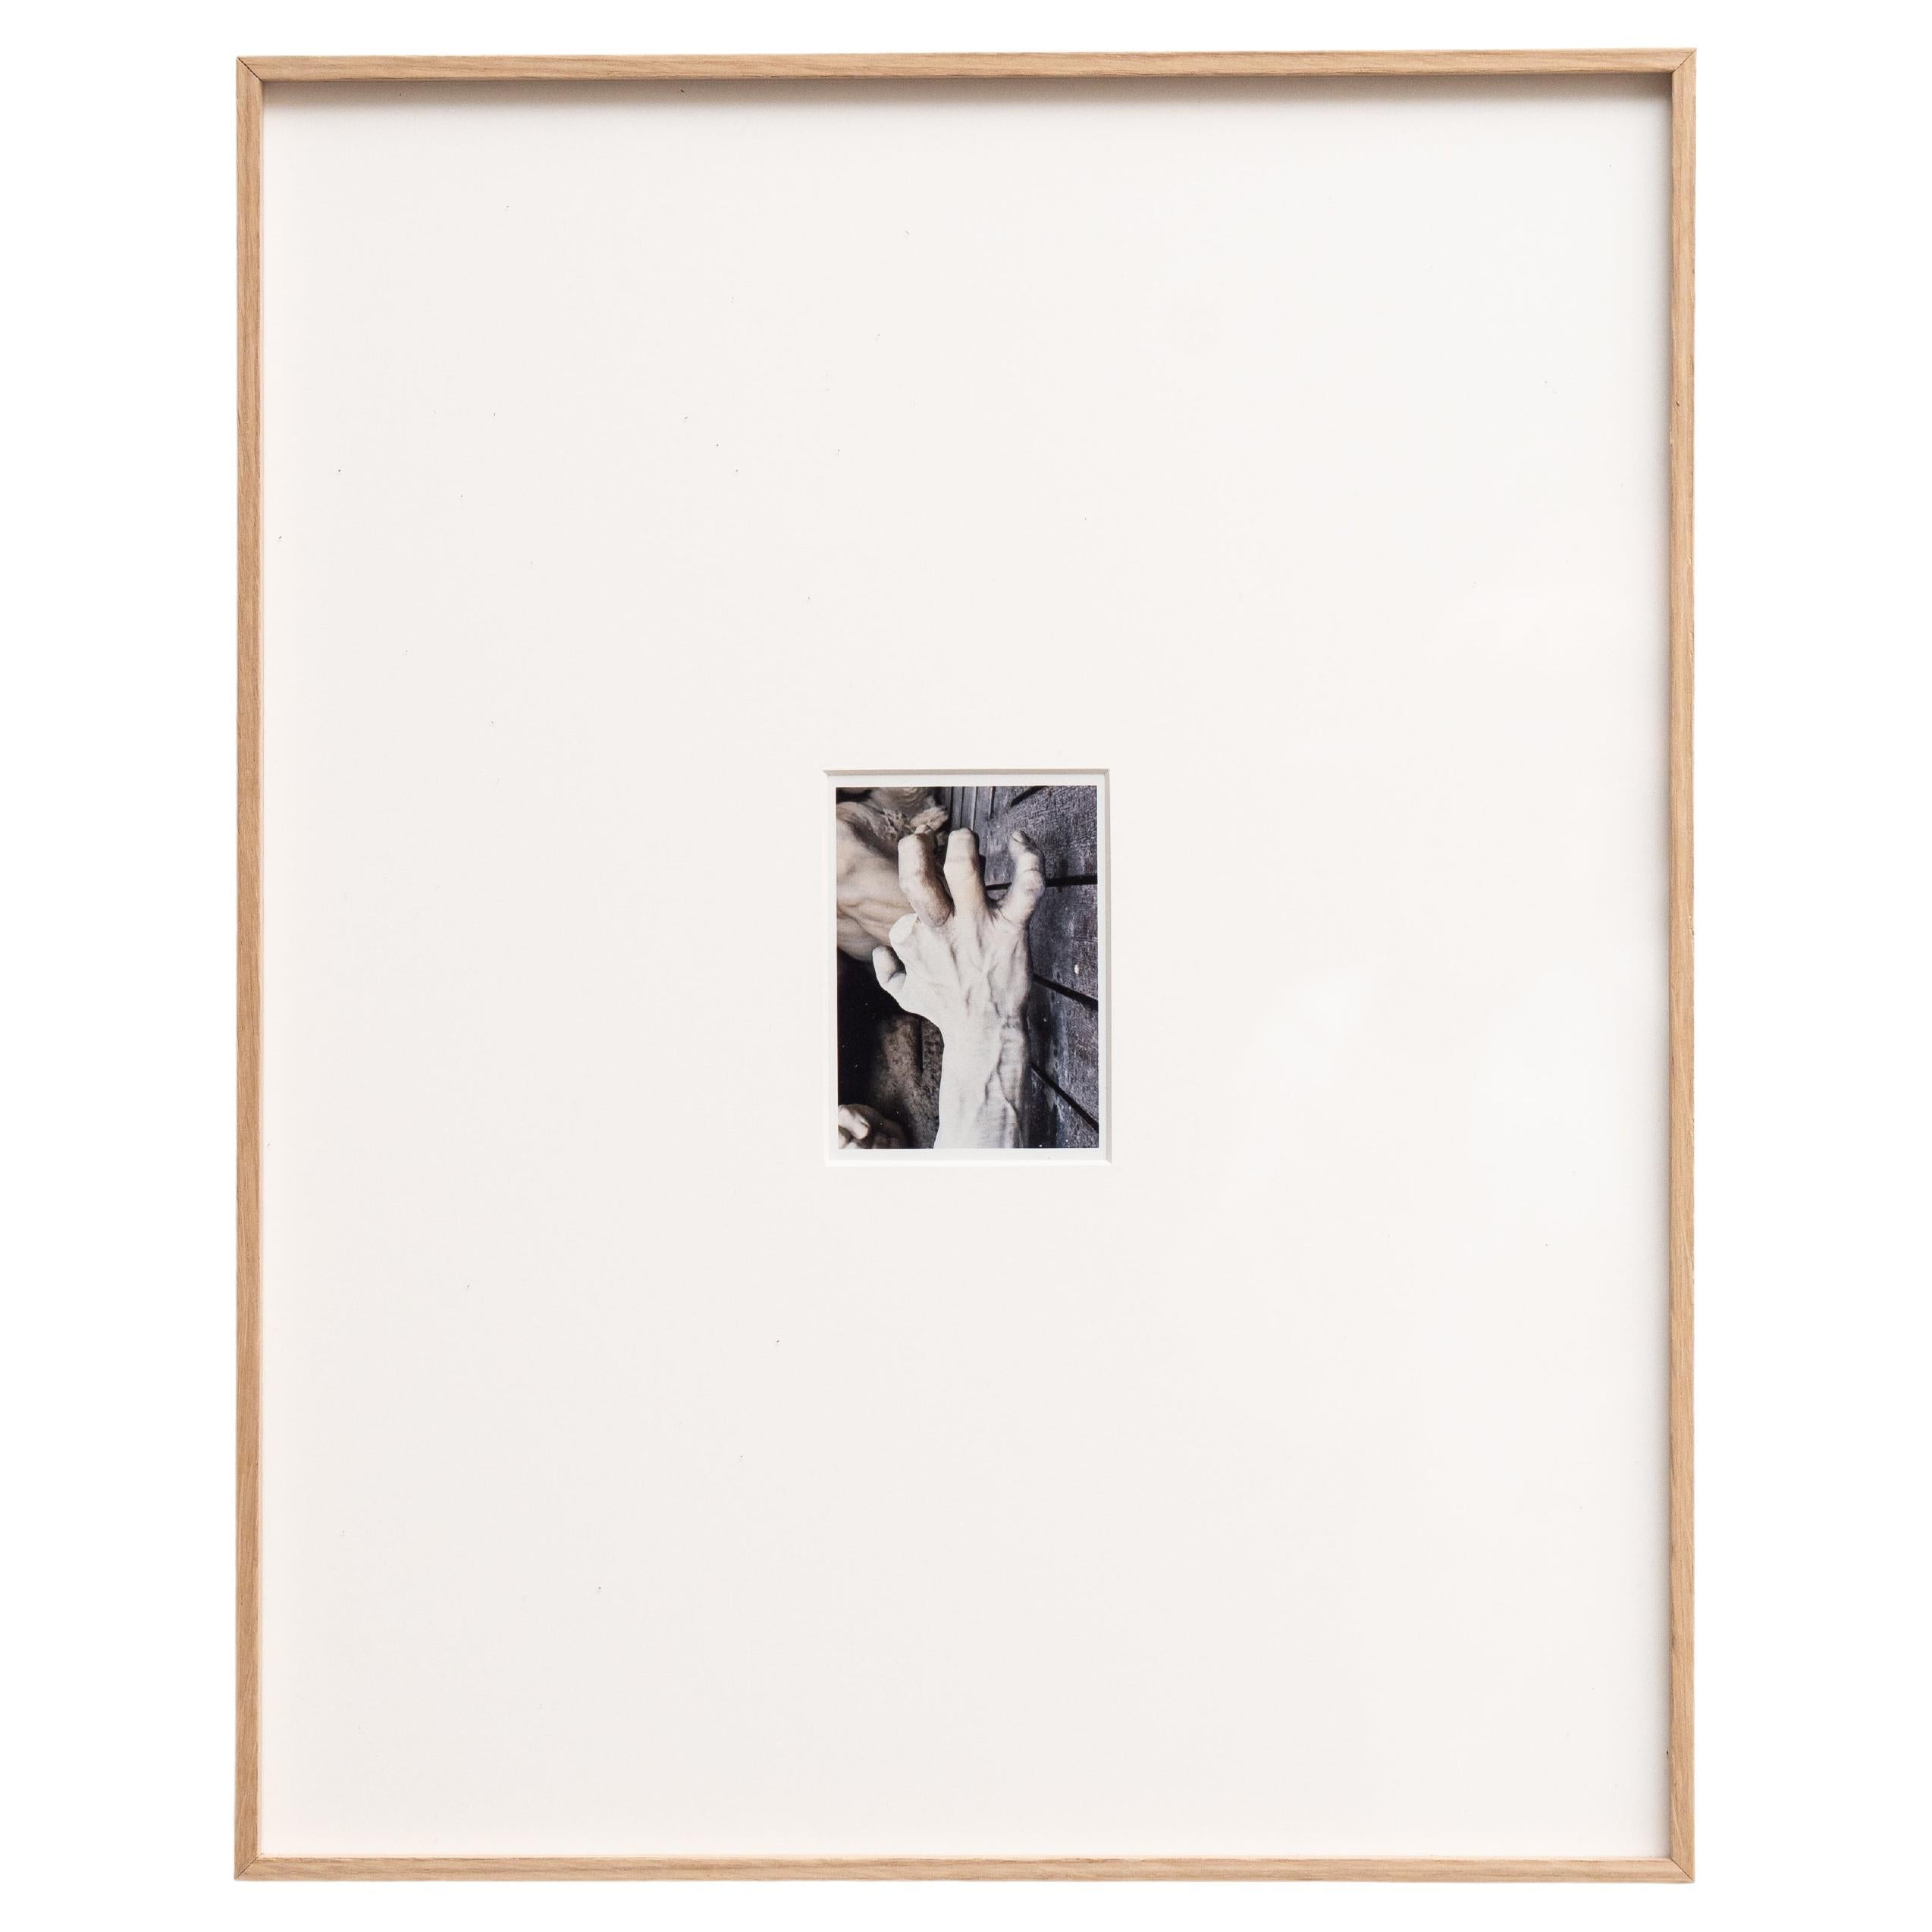 Pascal and Vastian Framed Photography, 2015